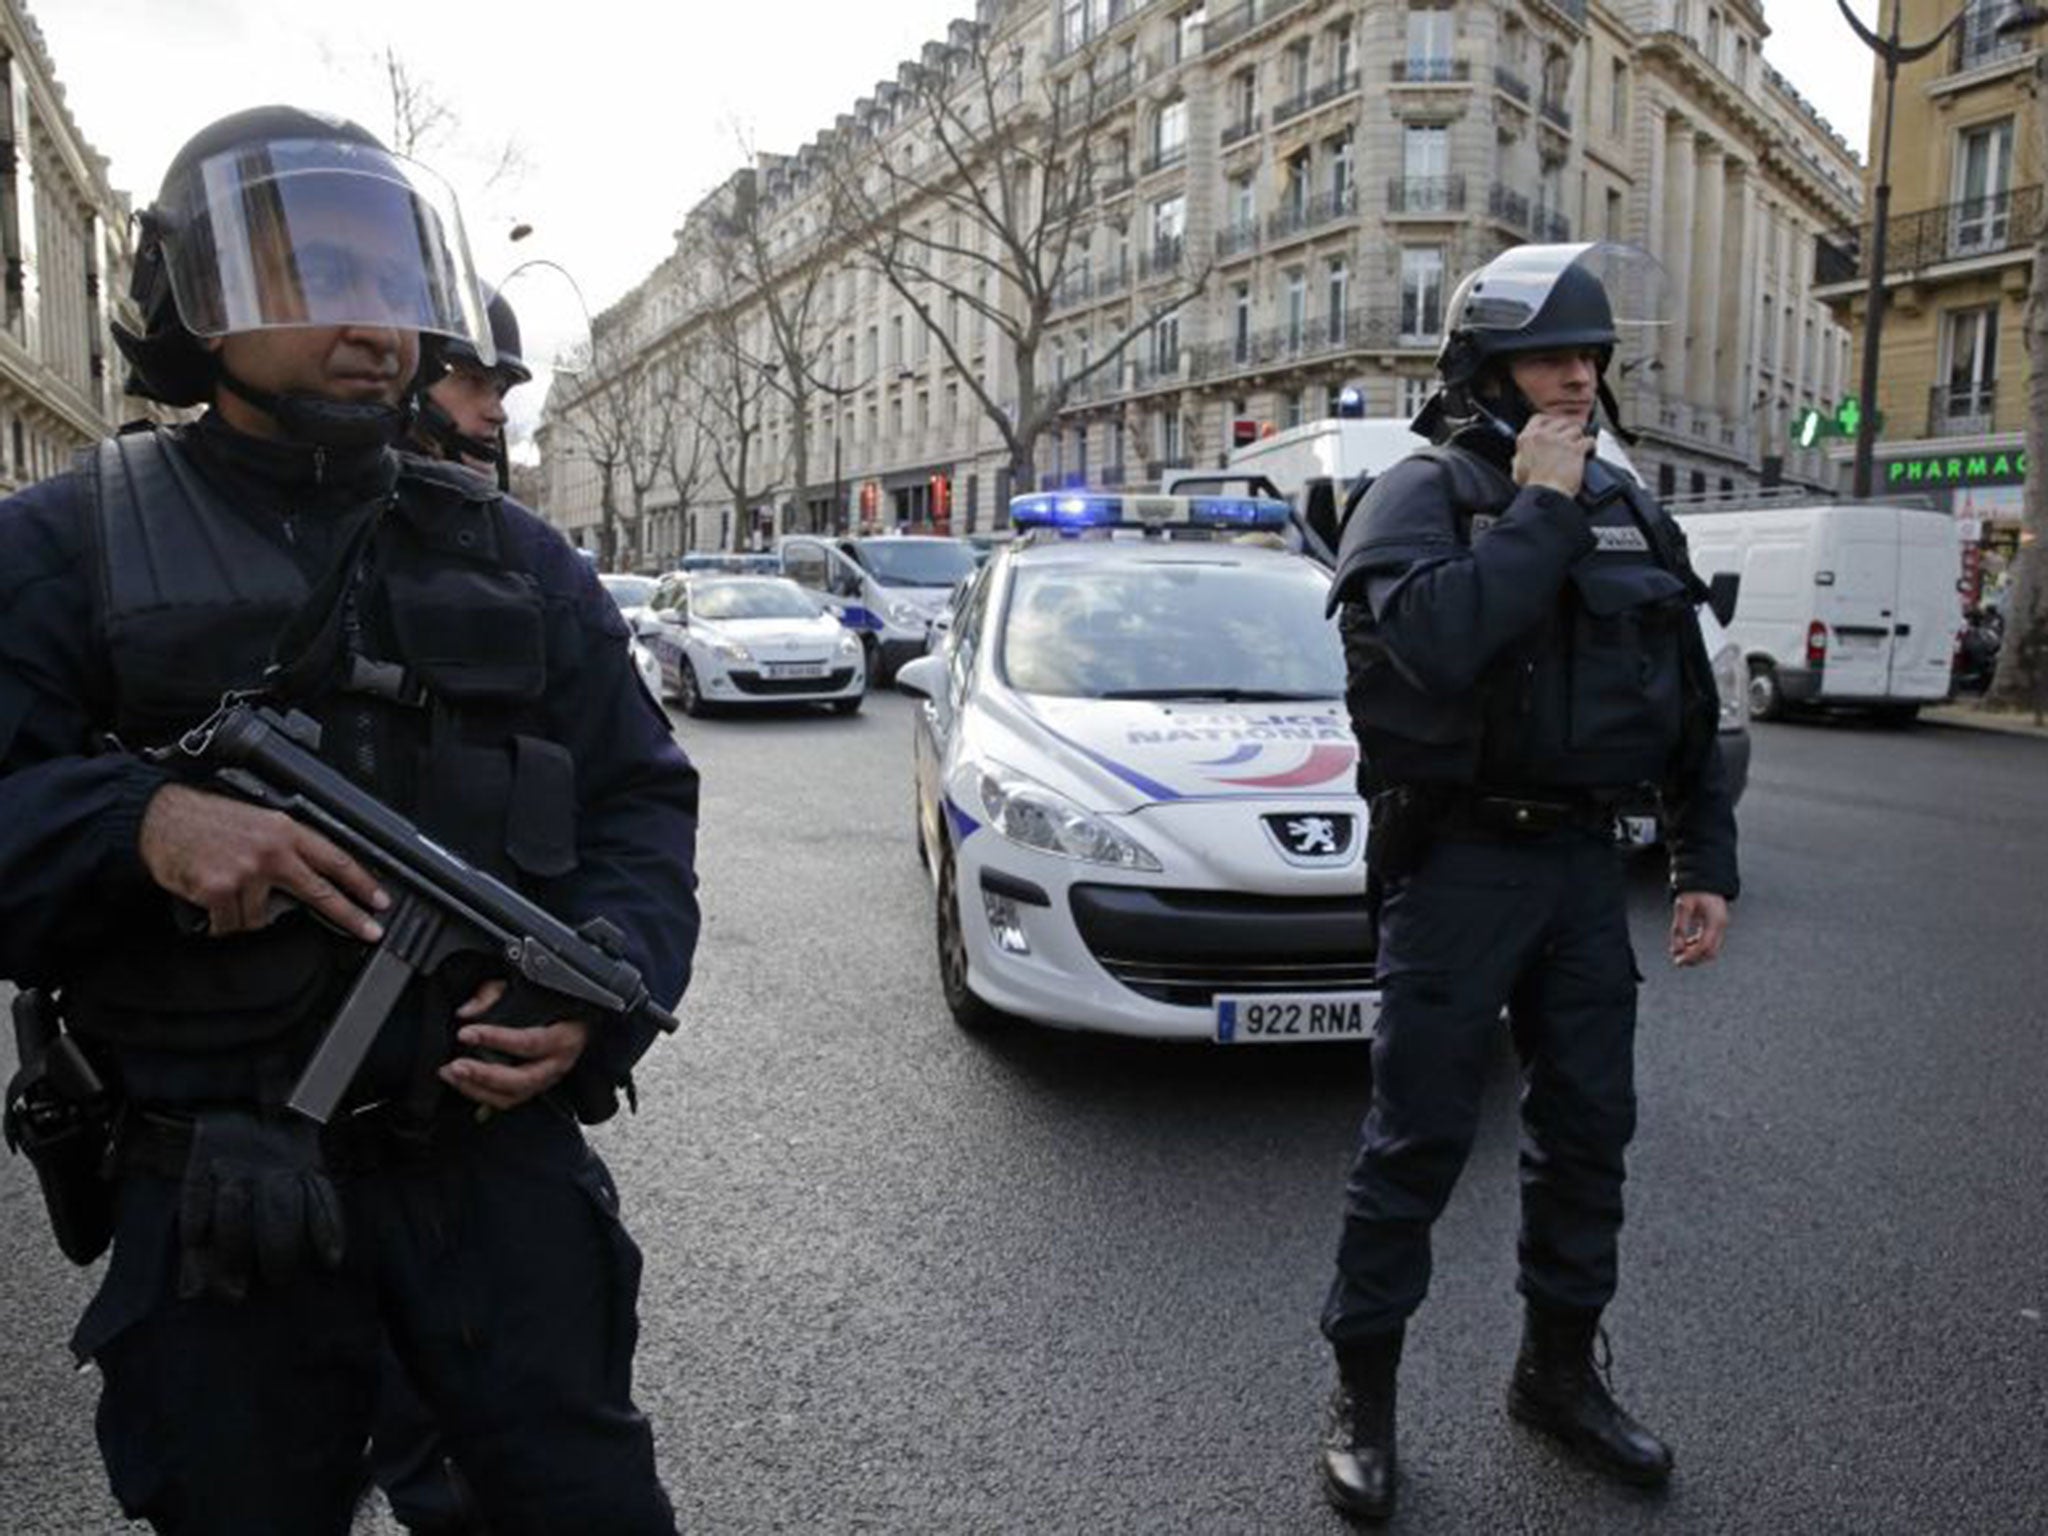 France has been on high alert since a string of terror attacks started in 2015